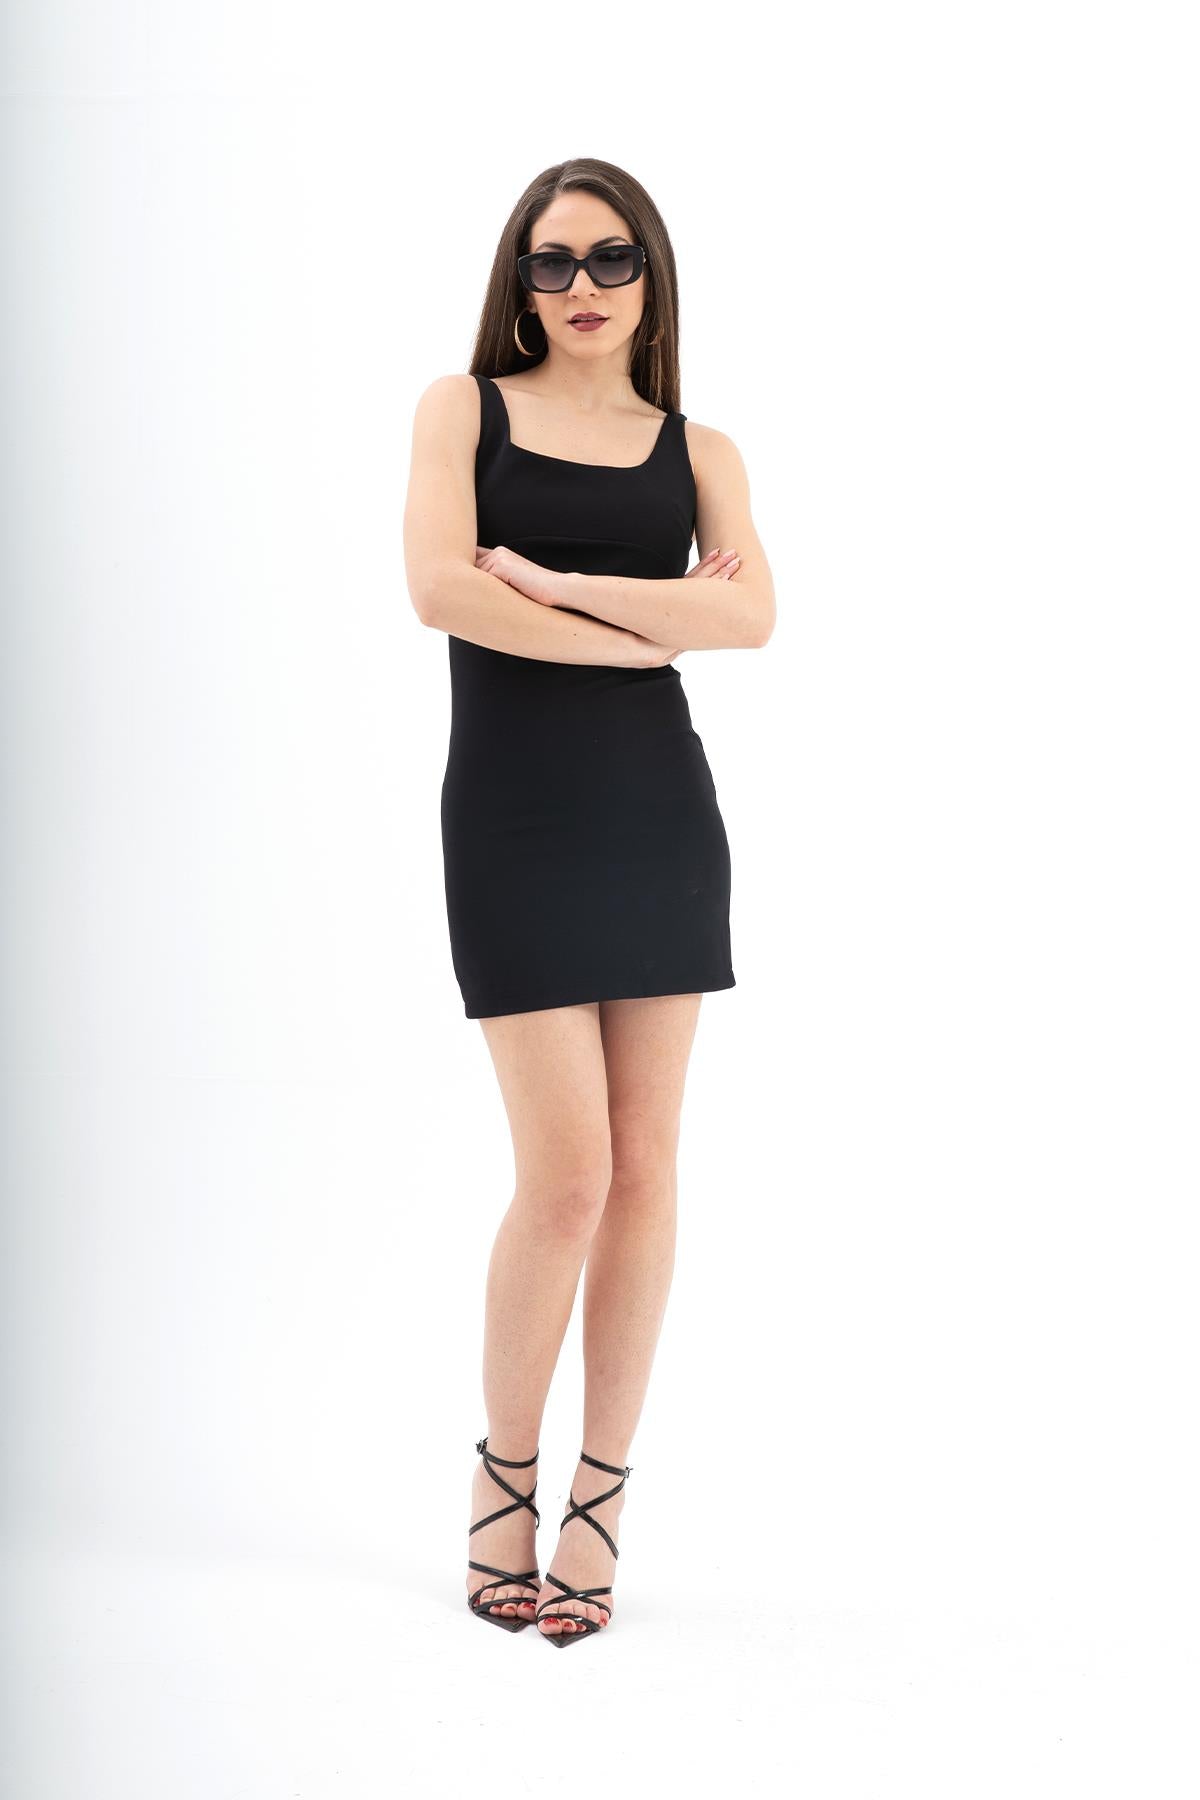 Women's Thick Strap Short Dress with Back Zipper - Black - STREETMODE™